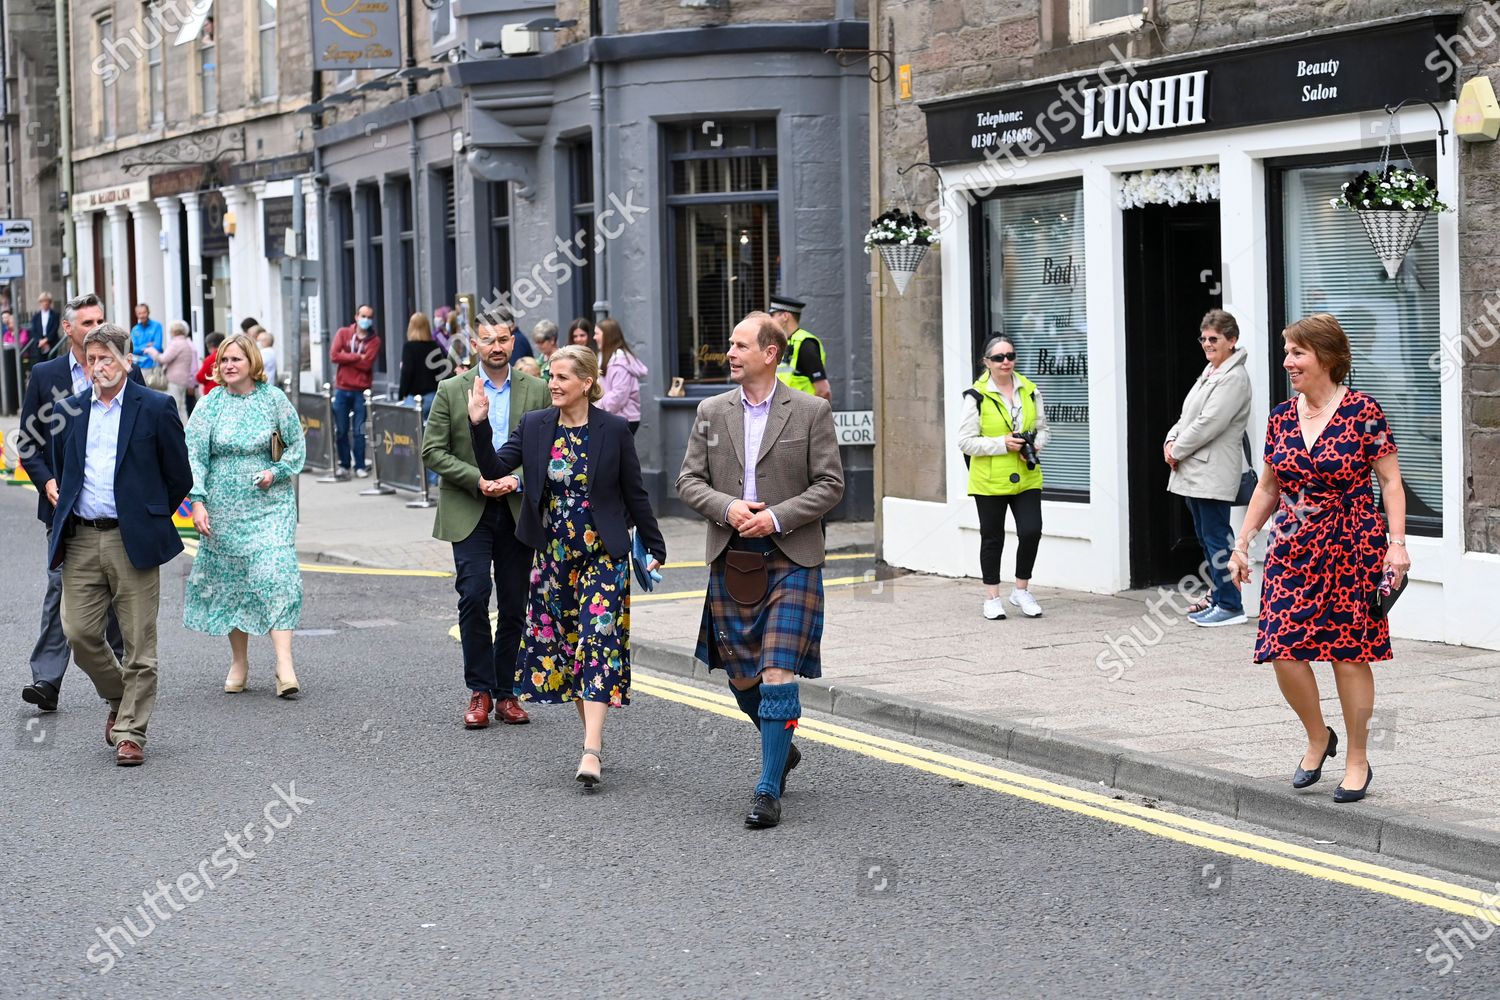 CASA REAL BRITÁNICA - Página 75 Prince-edward-and-sophie-countess-of-wessex-visit-to-s-mart-angus-forfar-scotland-uk-shutterstock-editorial-12172314aa